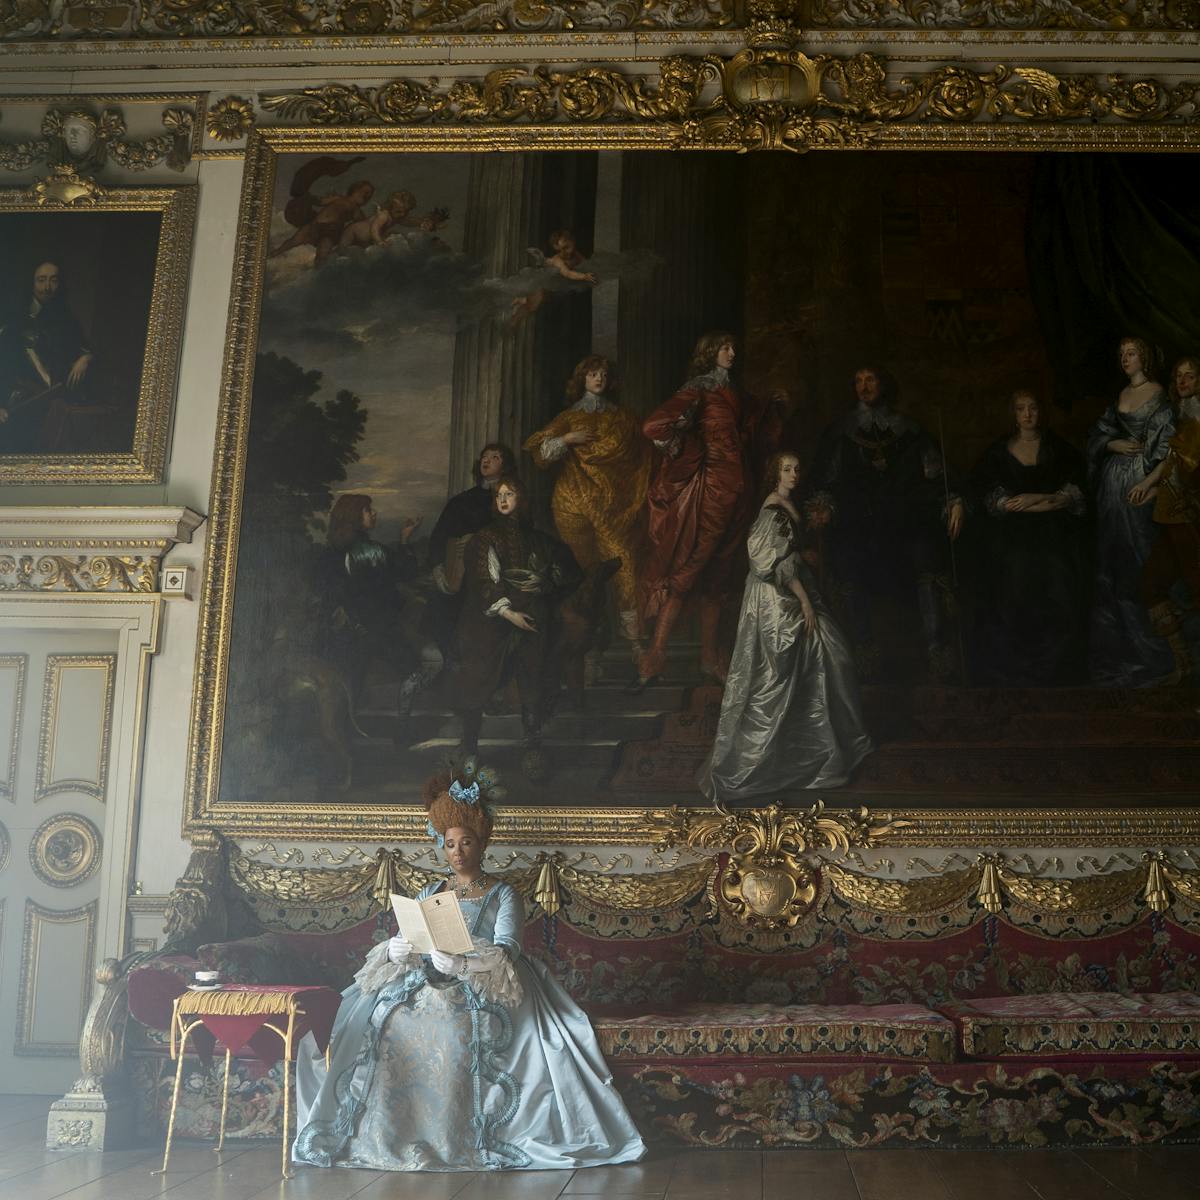 The Queen rests on an ornate couch patterned with gold trimming and red patterns. She wears a blue dress and blue headpiece. Behind her is a massive painting. 